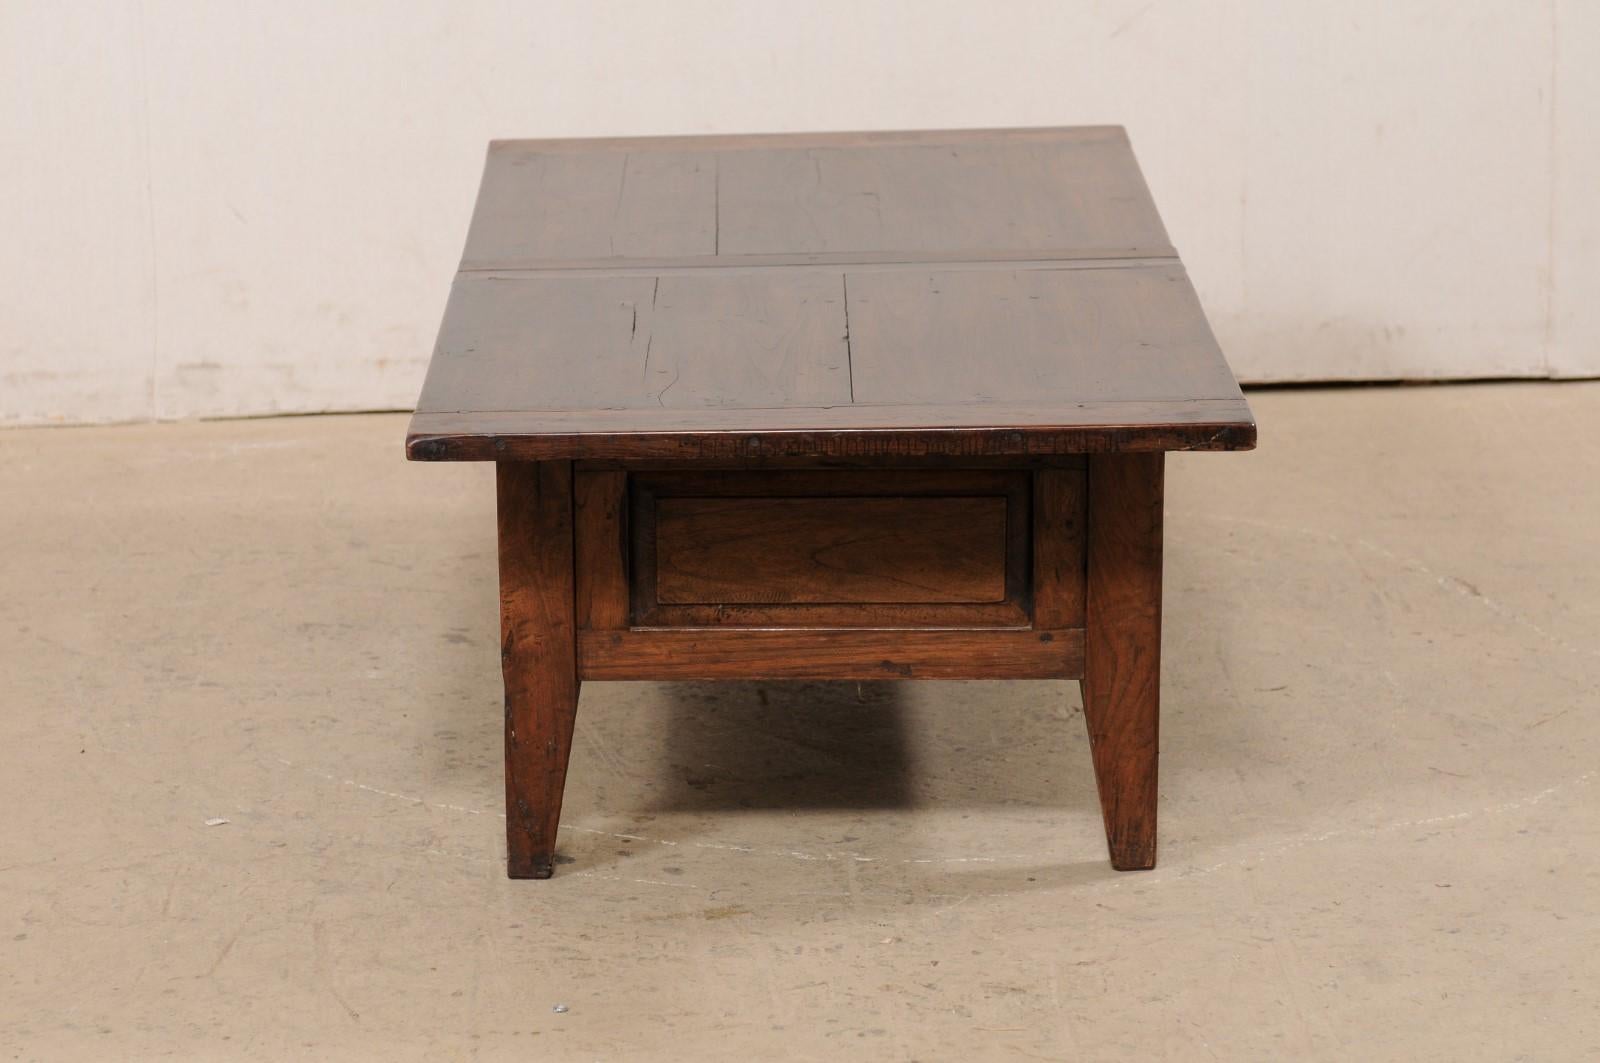 French Fruitwood Coffee Table in Rectangular-Shape w/Storage, Early 20th Century For Sale 8